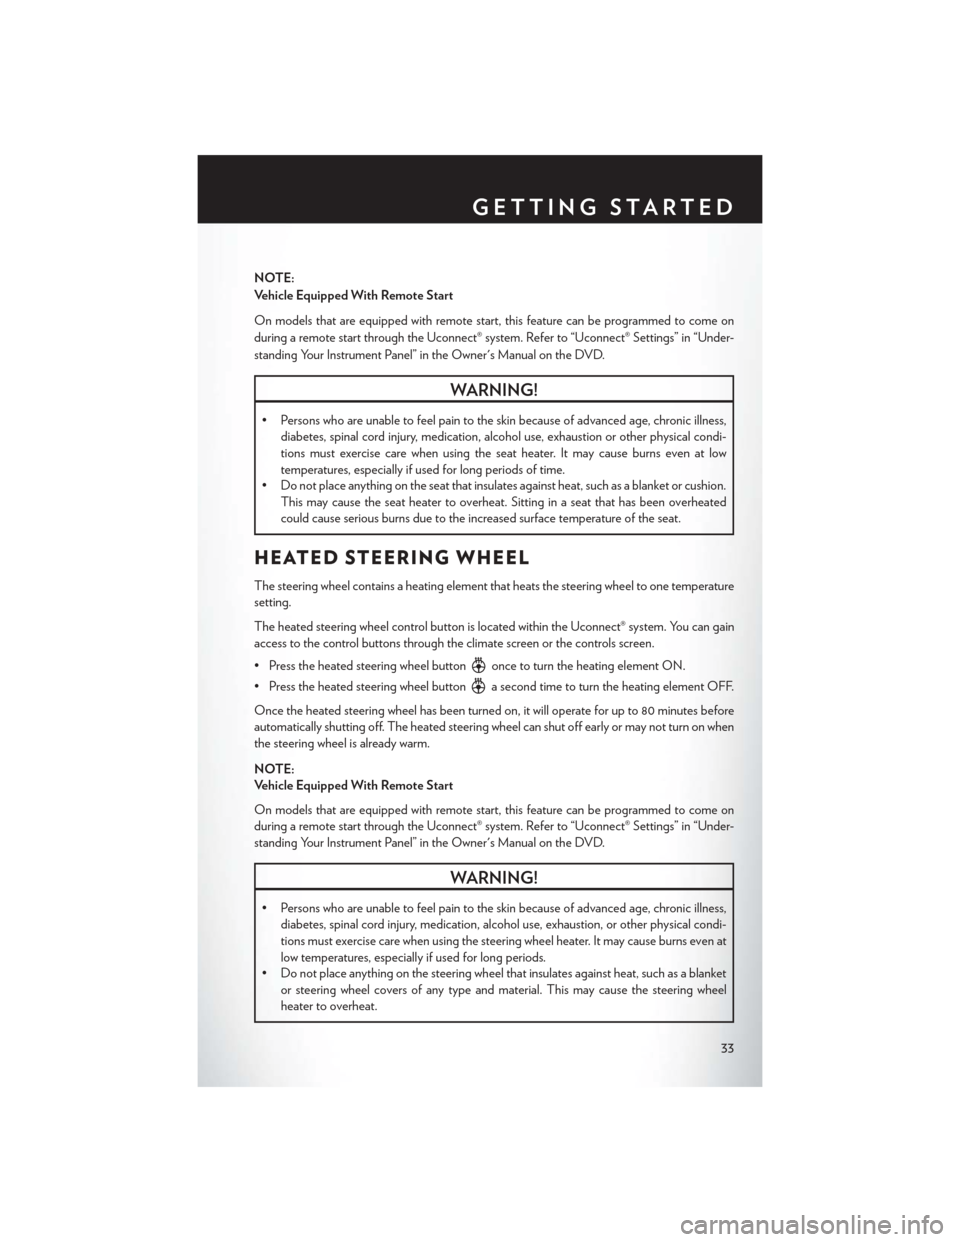 CHRYSLER 200 2015 2.G User Guide NOTE:
Vehicle Equipped With Remote Start
On models that are equipped with remote start, this feature can be programmed to come on
during a remote start through the Uconnect® system. Refer to “Uconn